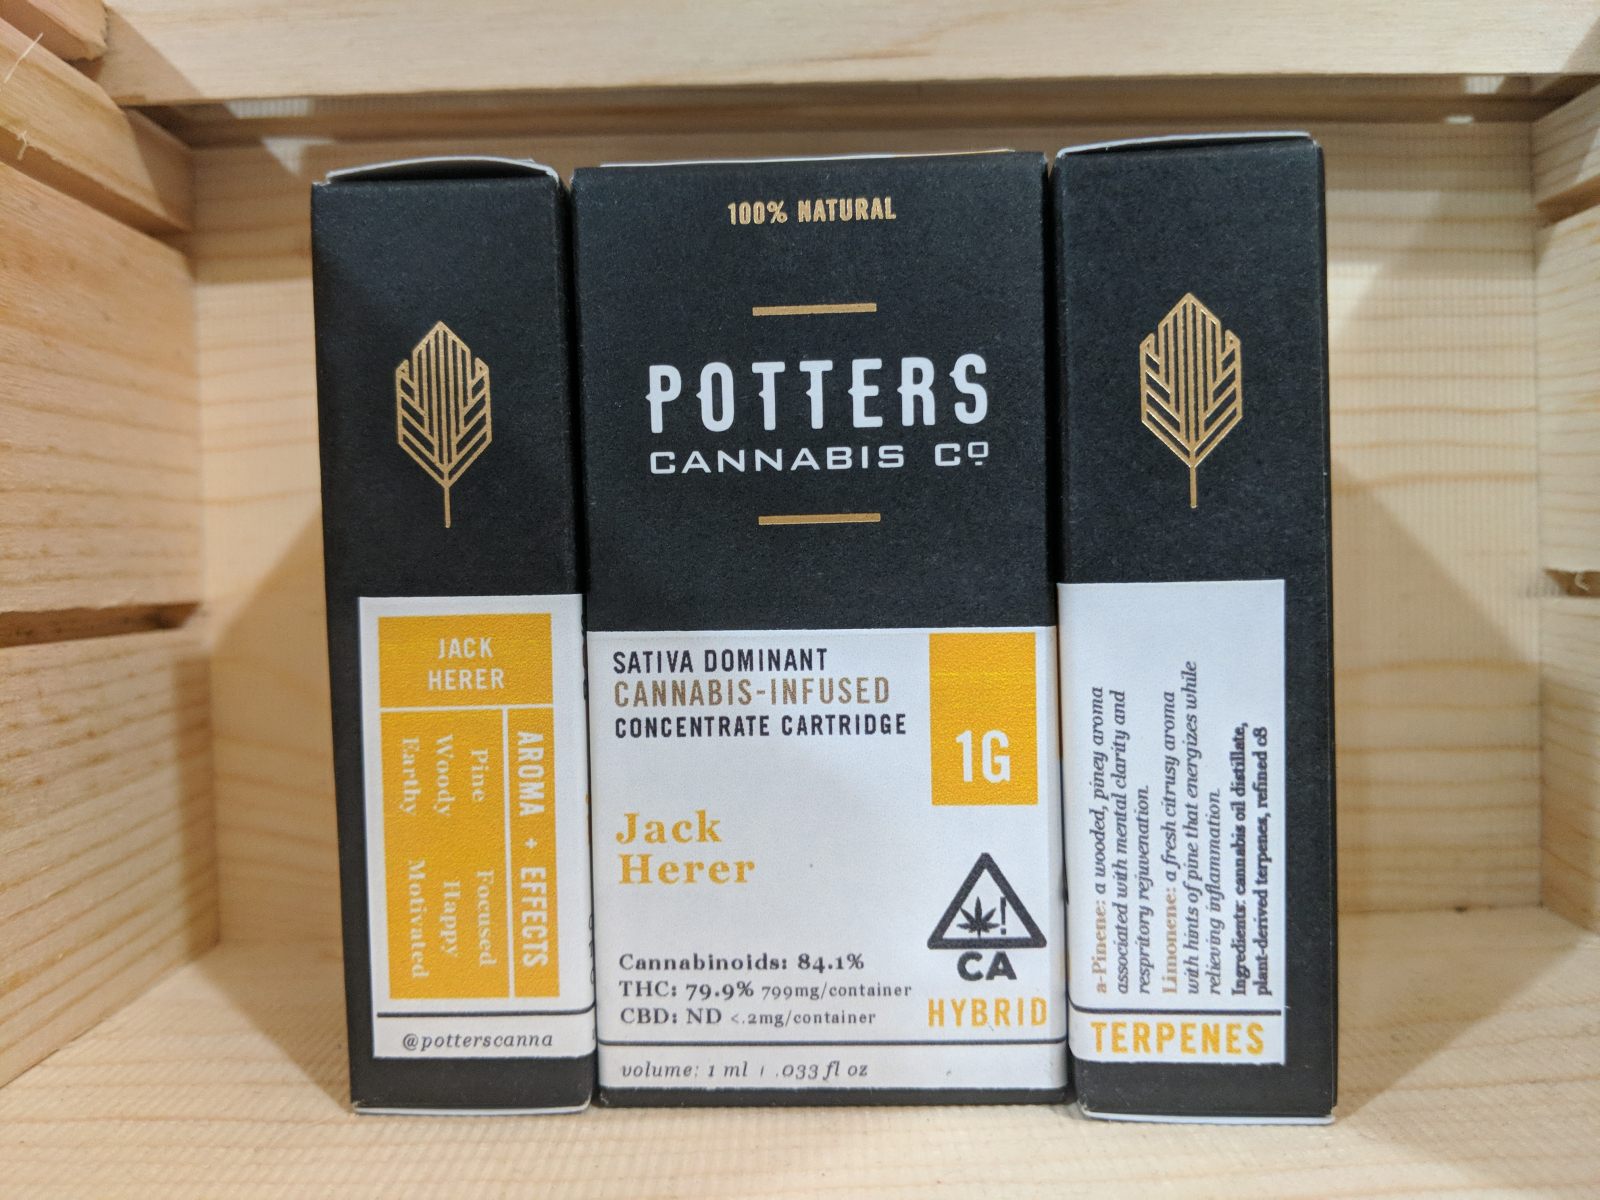 Full gram jack herer cartridge by potters cannabis co